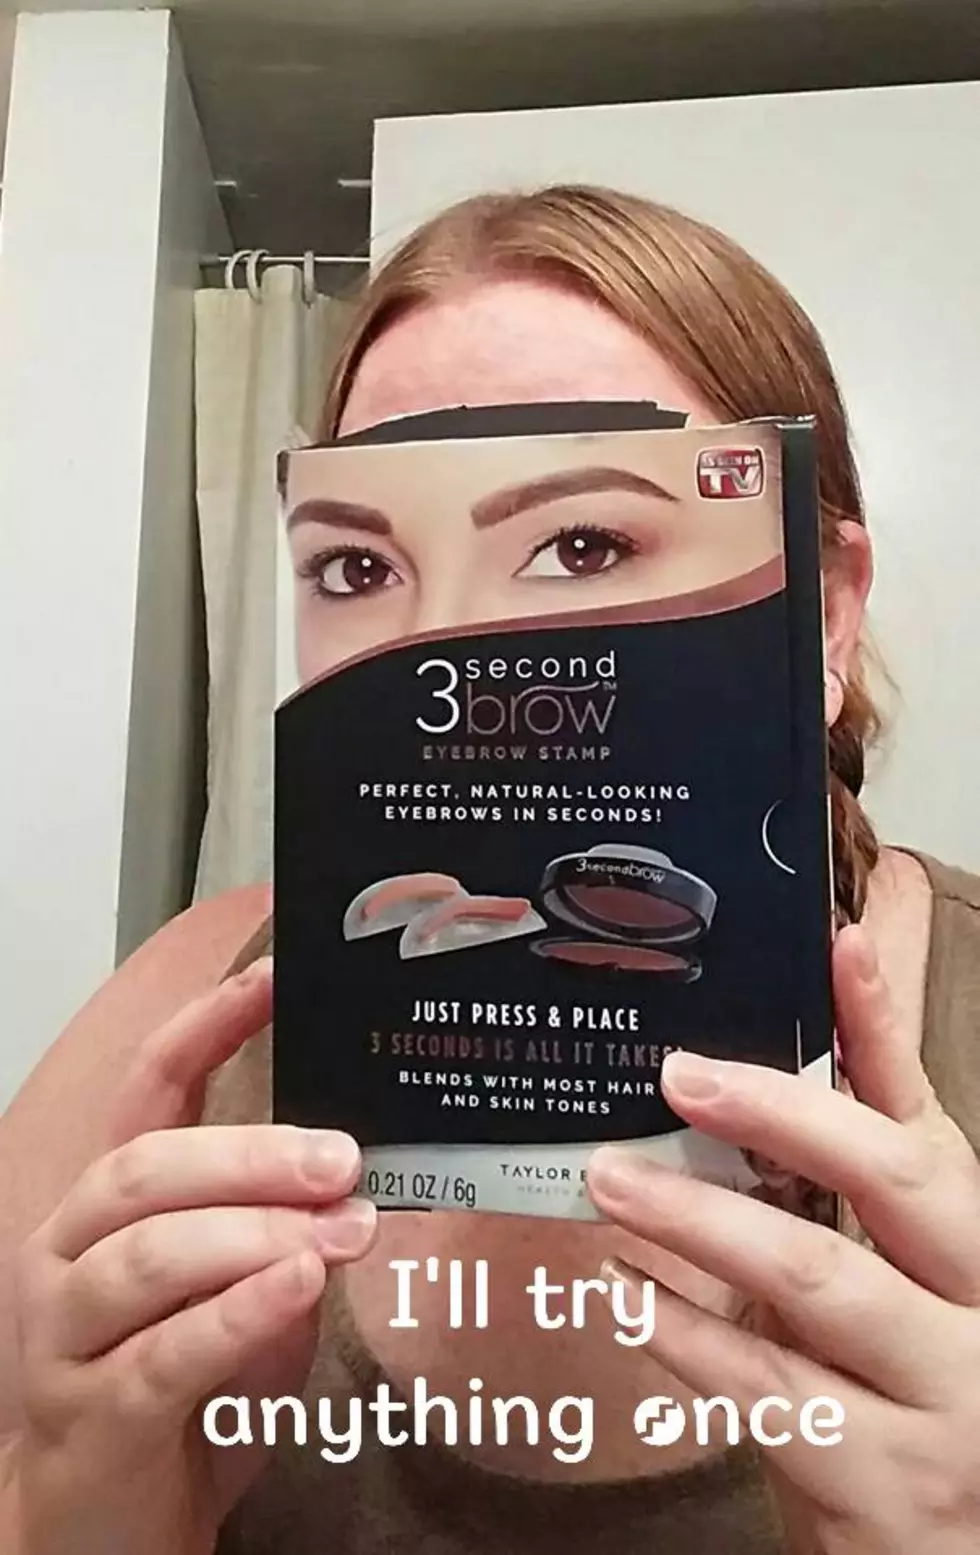 Woman&#8217;s Quest for Strong &#8216;Brow Game Has Me Laughing [PHOTOS]